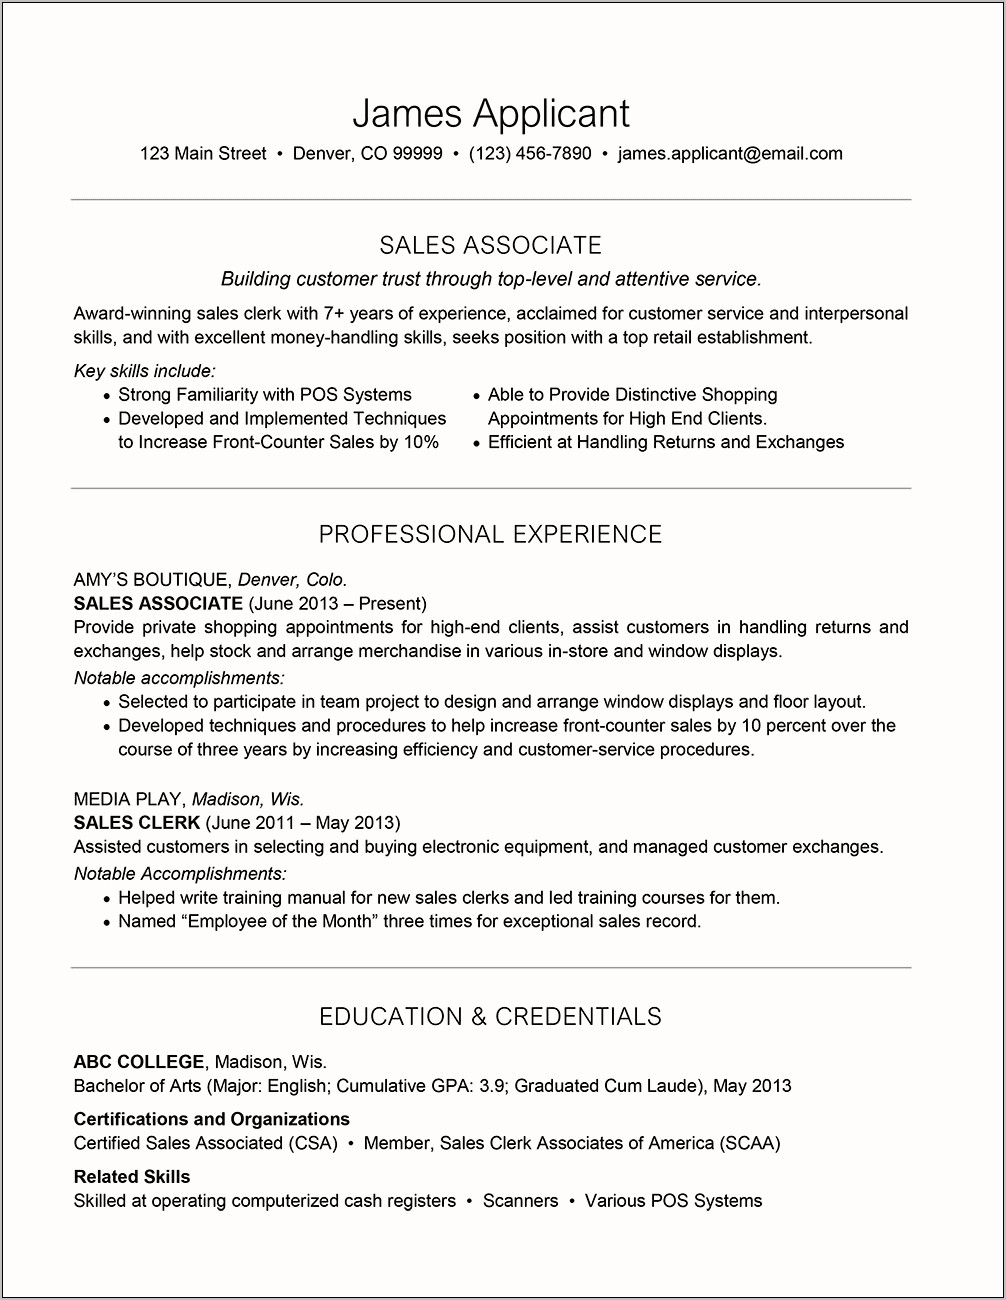 Customer Service Profile Examples For Resumes